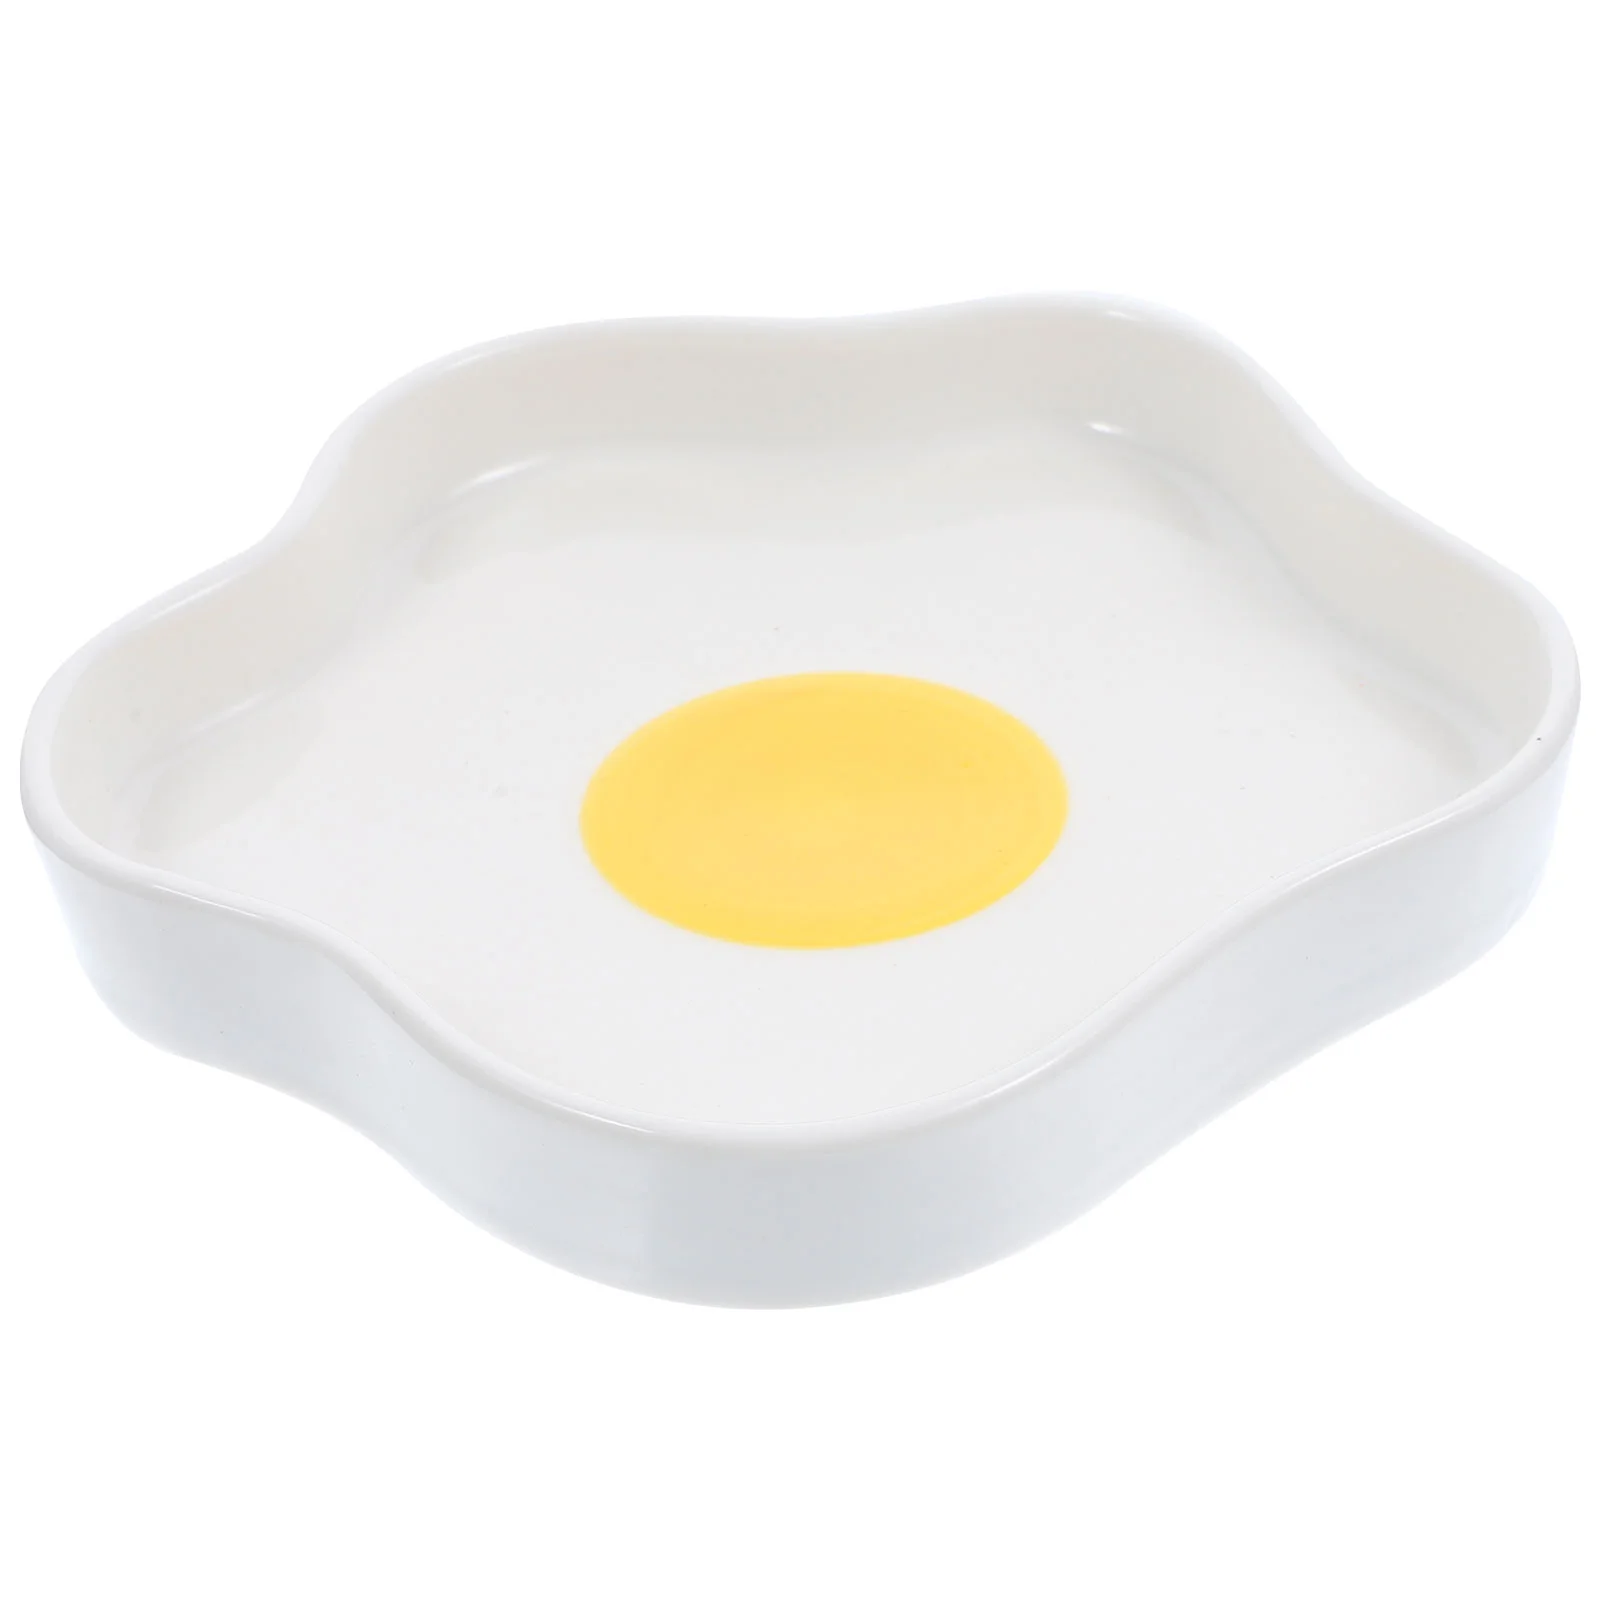 

Poached Egg Ceramic Plate Dessert Serving Tray Jewelry Cute Ceramics Household Food Trays Fruits Home Breakfast Plates